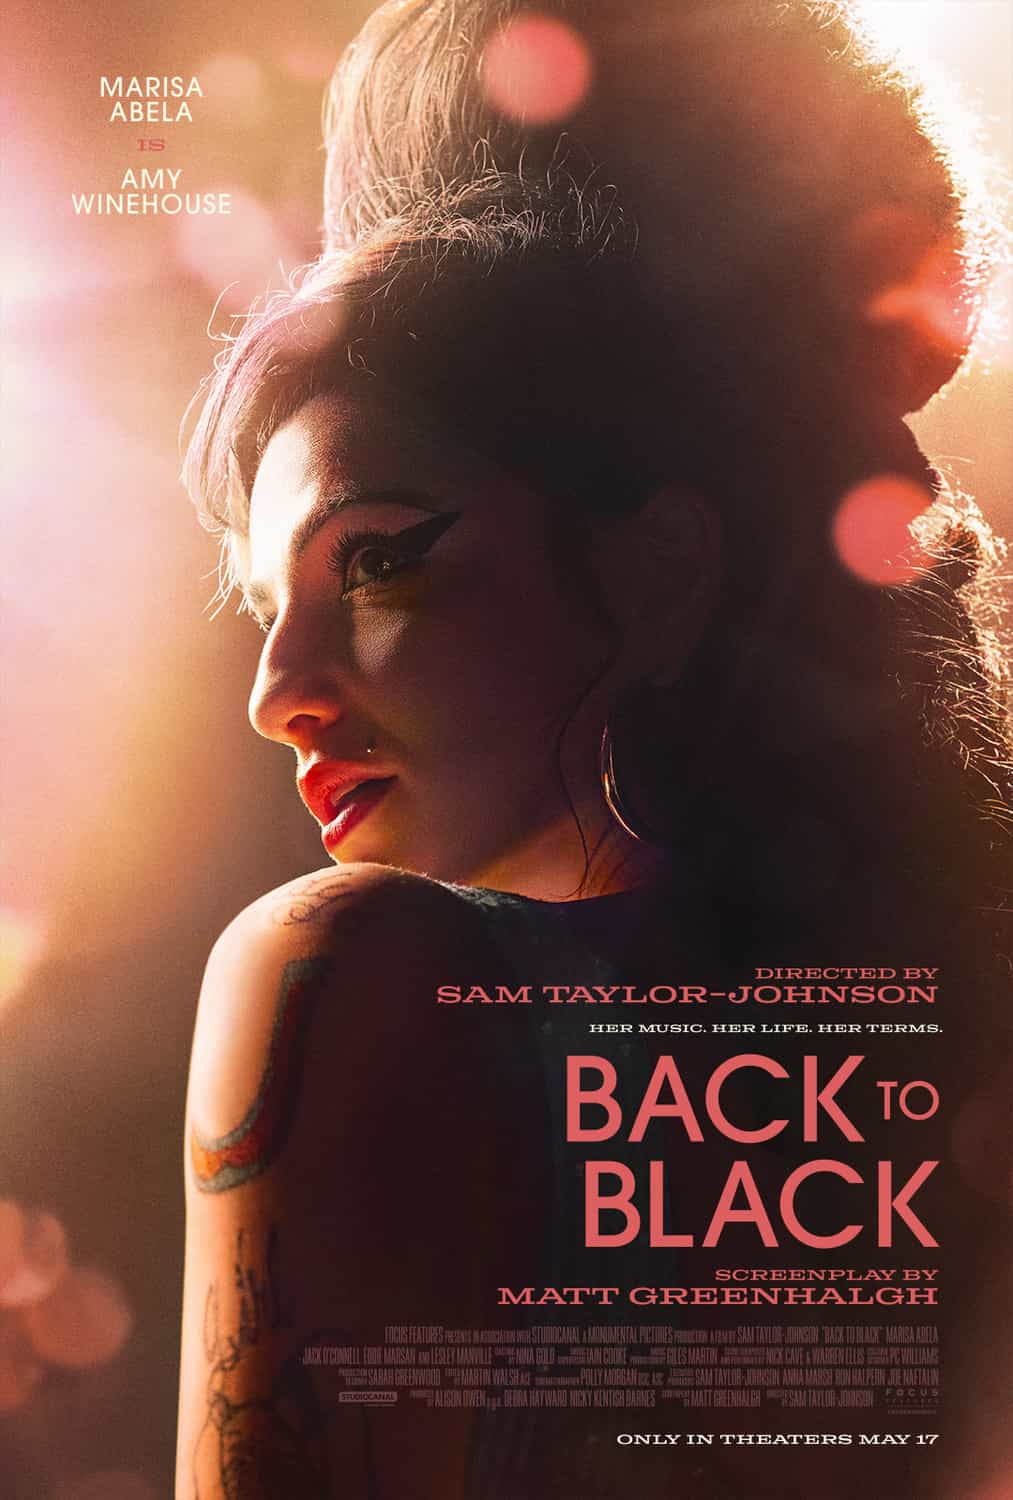 Check out the new trailer and poster for upcoming movie Back to Black which stars Marisa Abela and Jack O